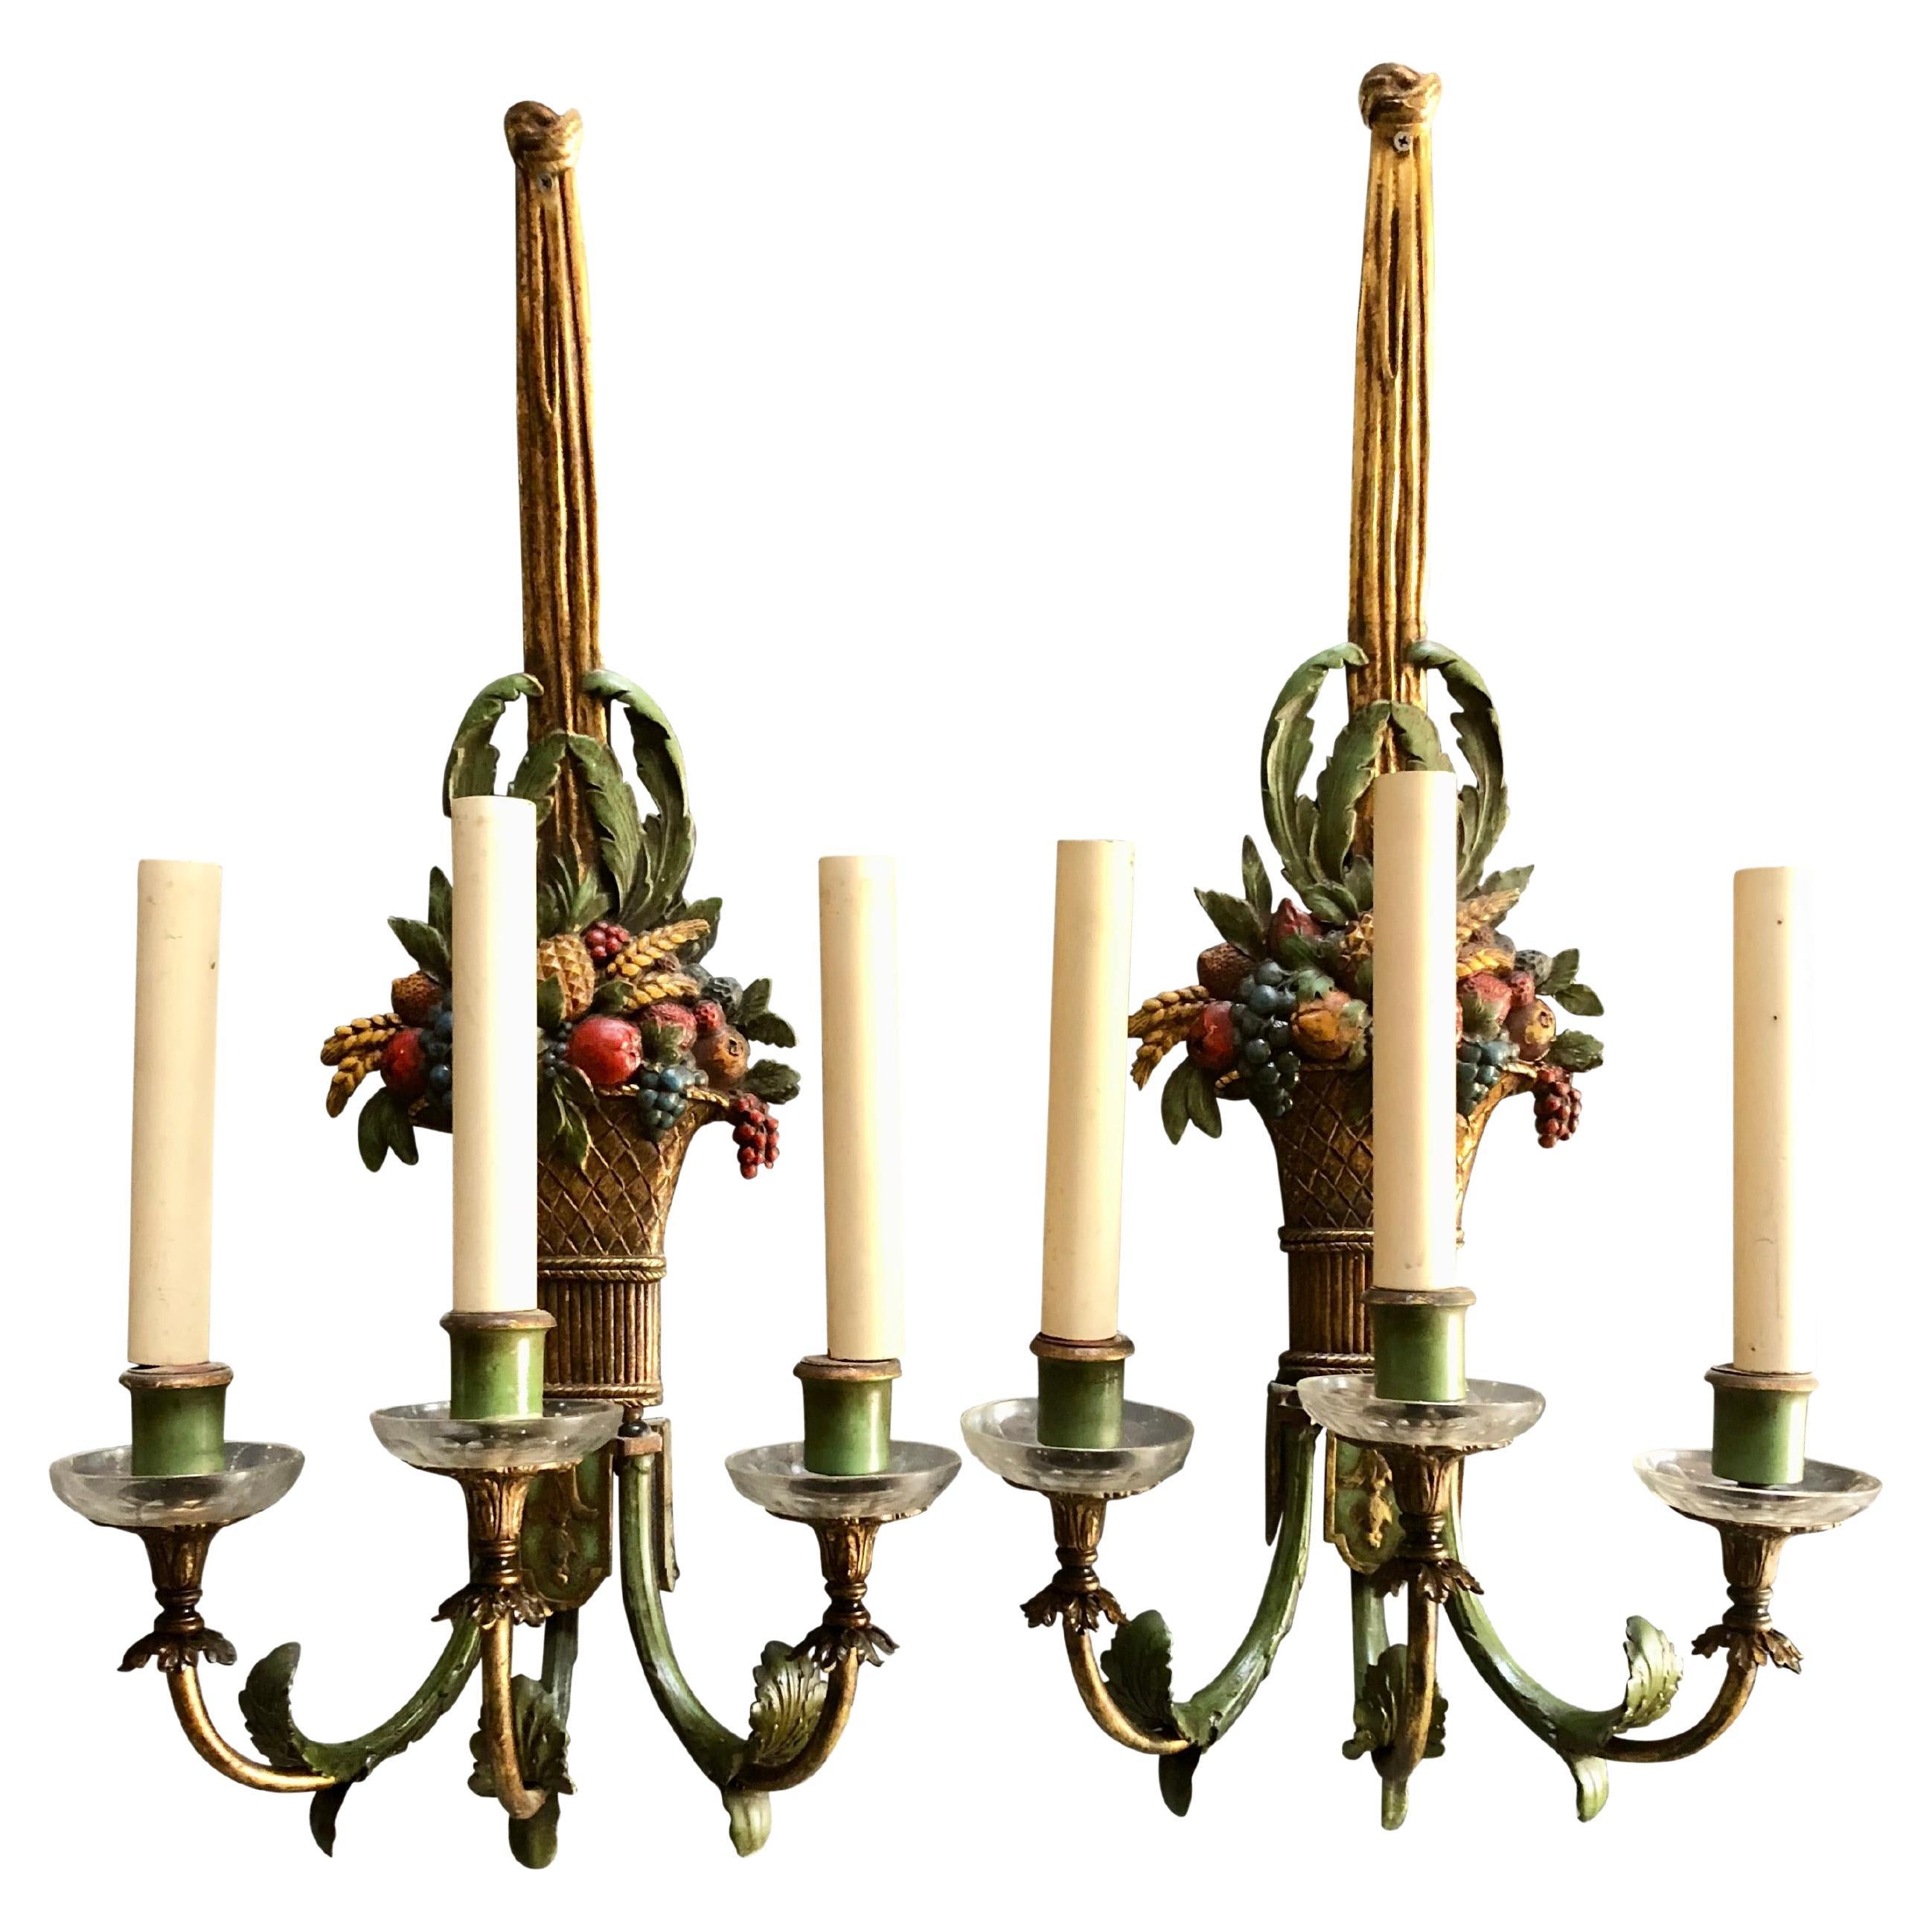 Pair of Large Gilt Bronze and Polychrome Wall Sconces by Sterling Bronze Co.